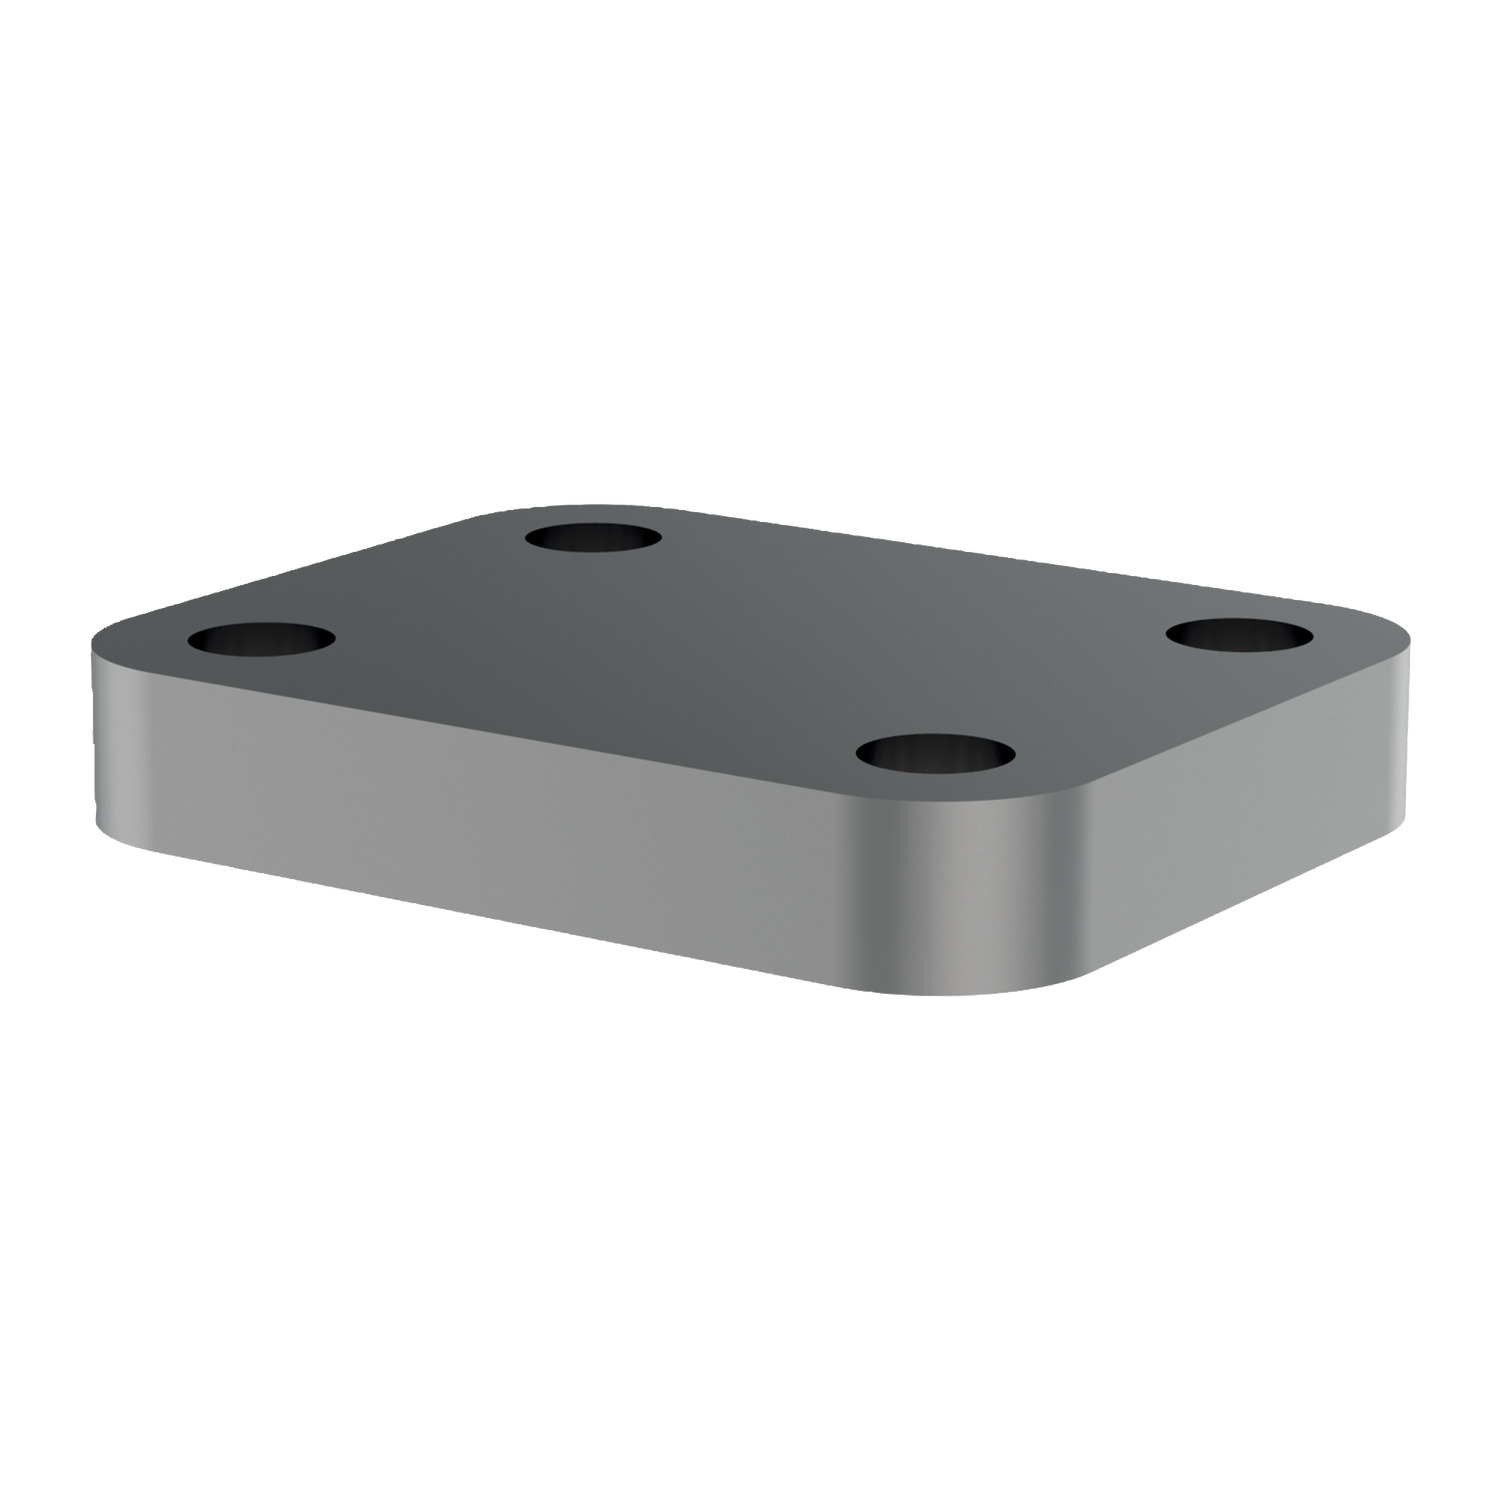 Product 46070.6, Base Plate for modular toggle clamps / 